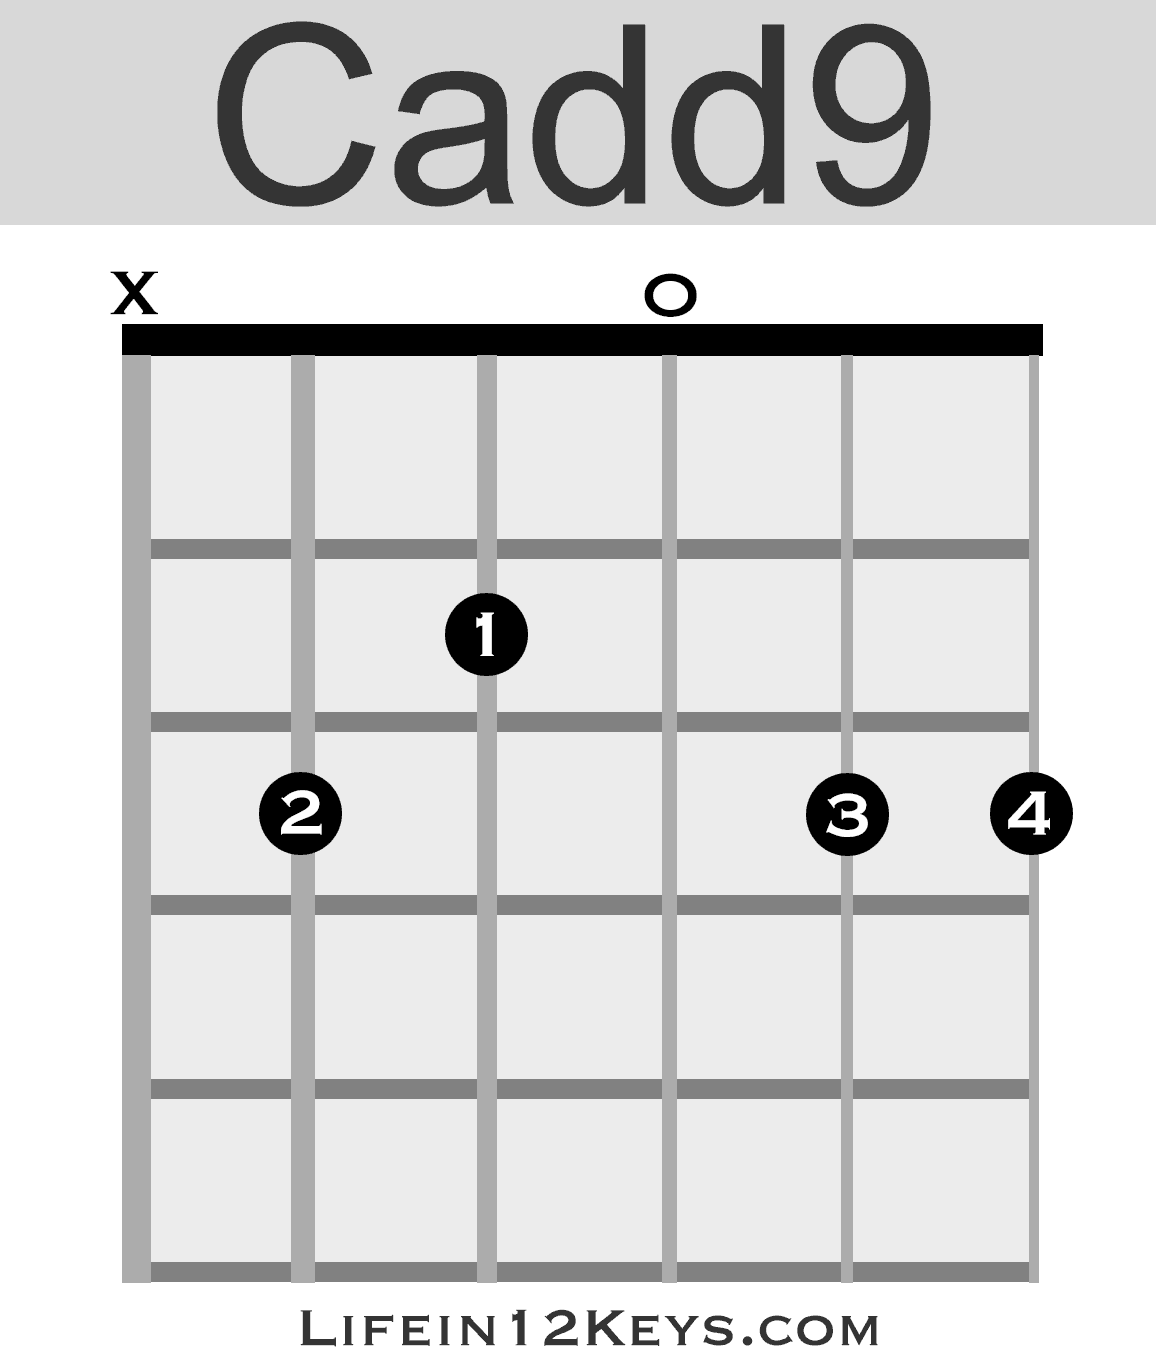 C Added 9th Chords (Cadd9) #guitarlesson #guitarchords